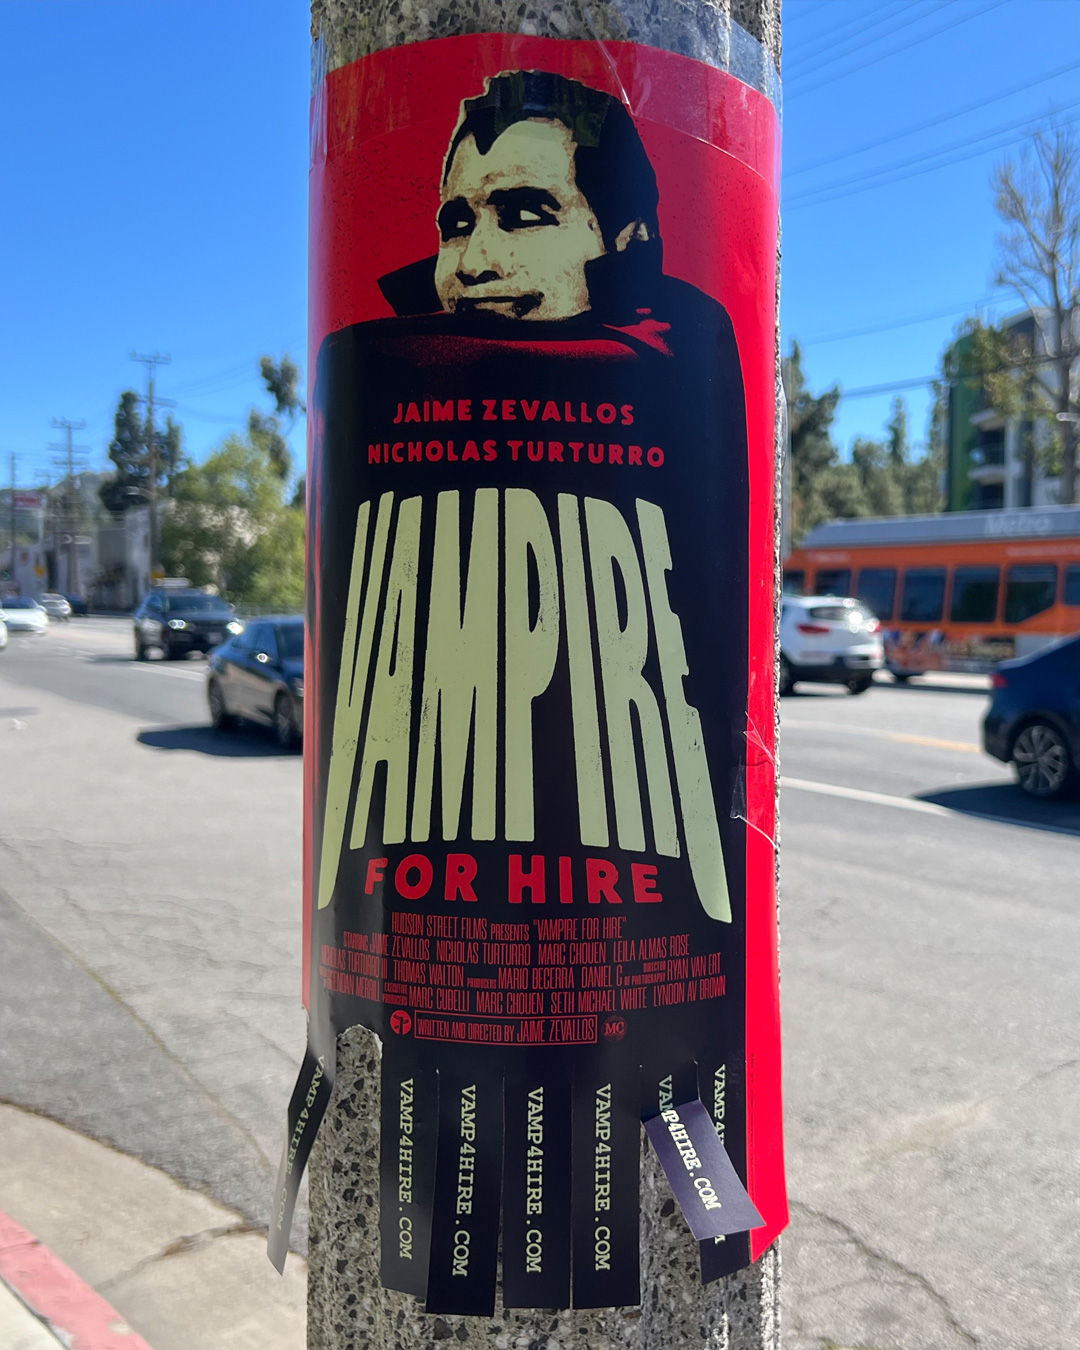 Vampire For Hire